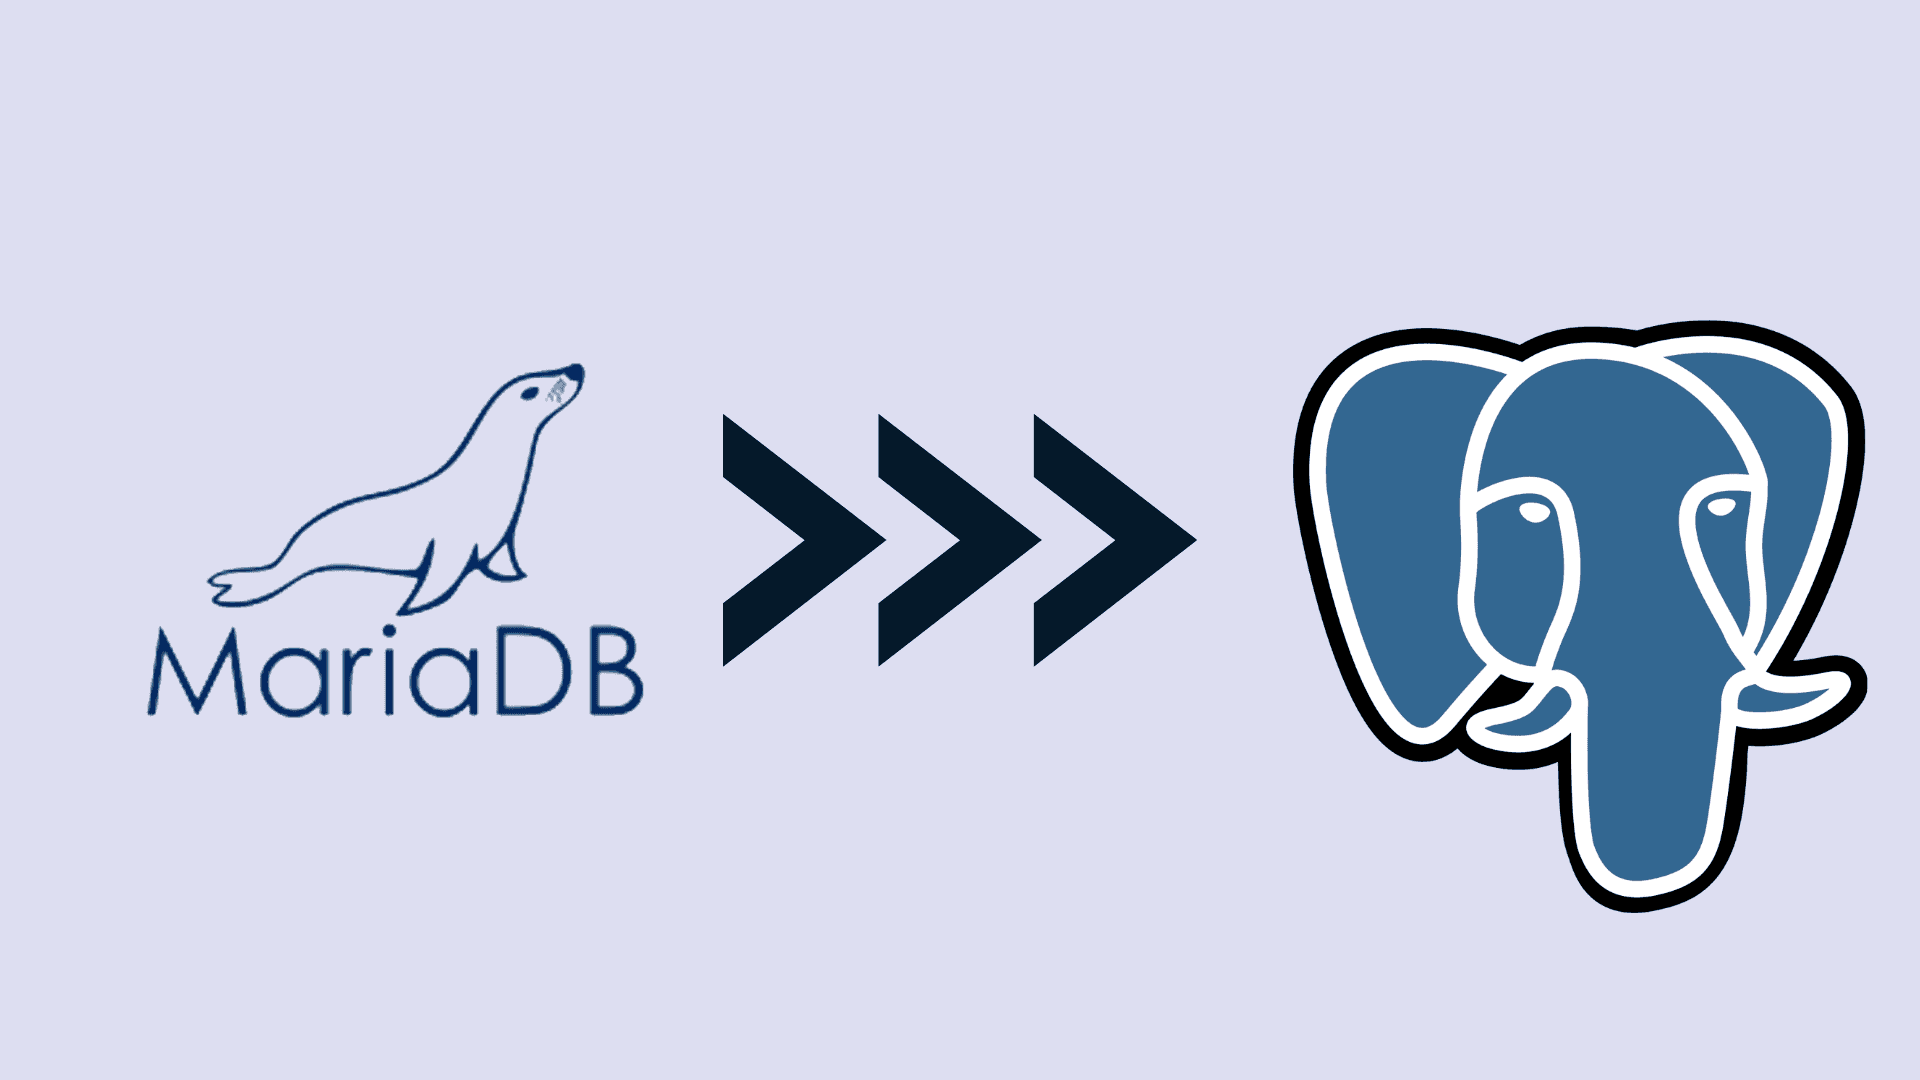 How to Migrate MariaDB to Postgres: A Step-By-Step Guide